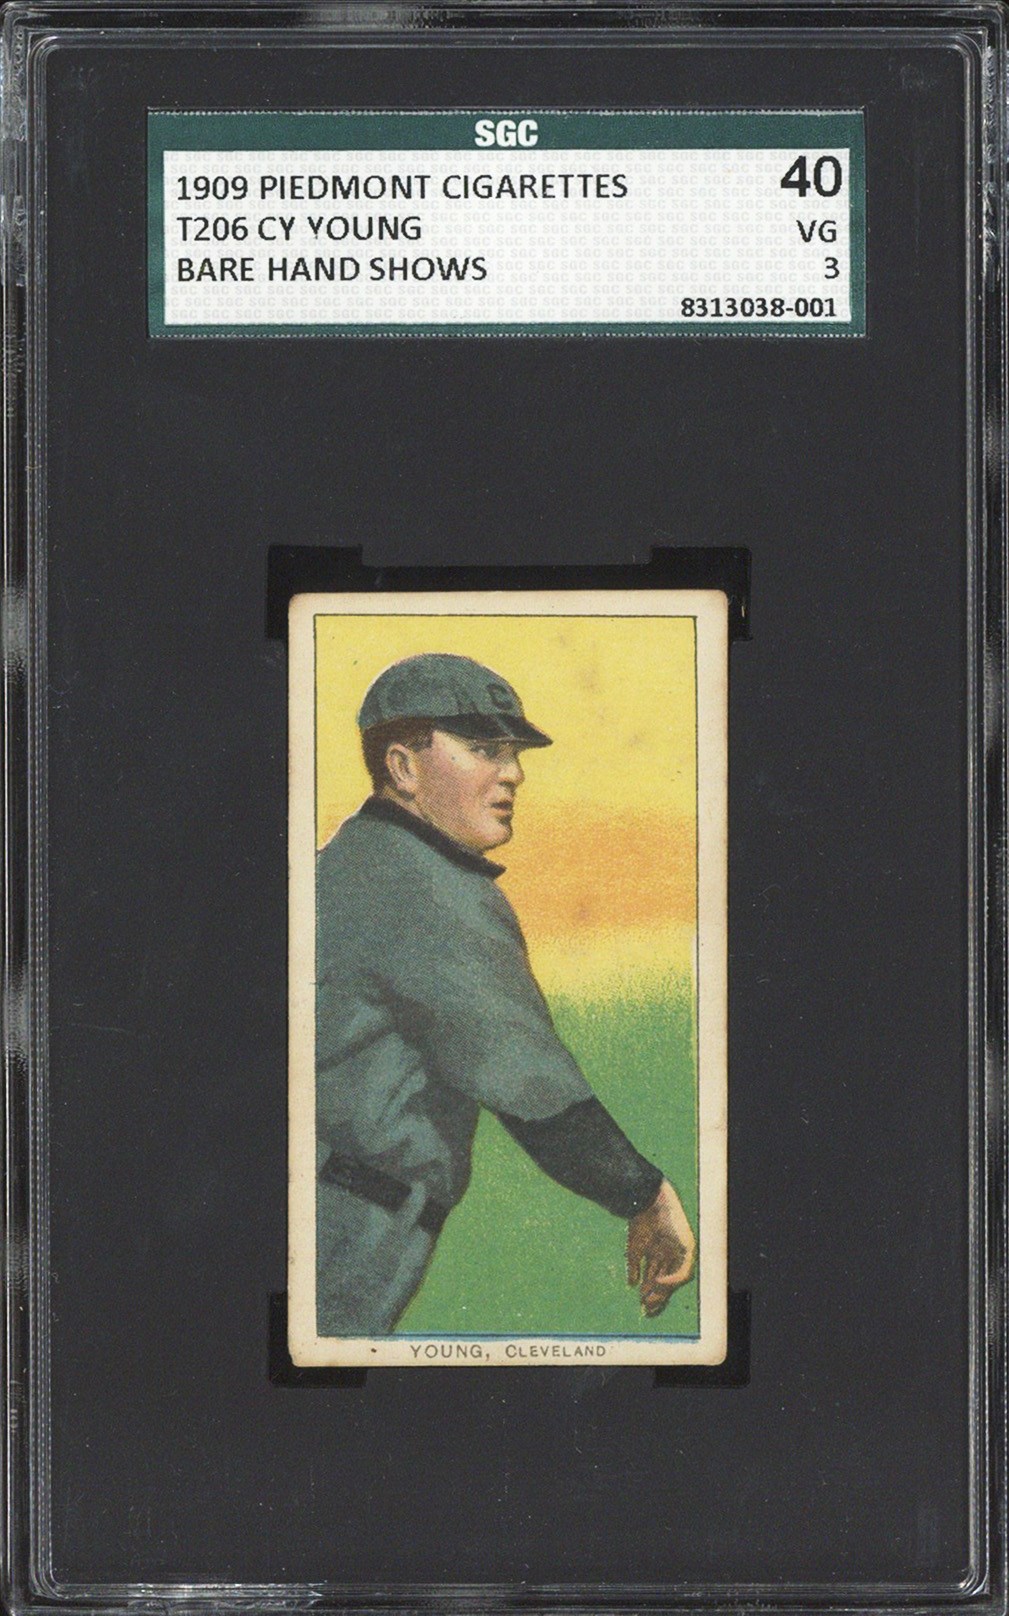 1909-11 T206 Cy Young (HOF - Bare Hand Shows) - SGC VG 3